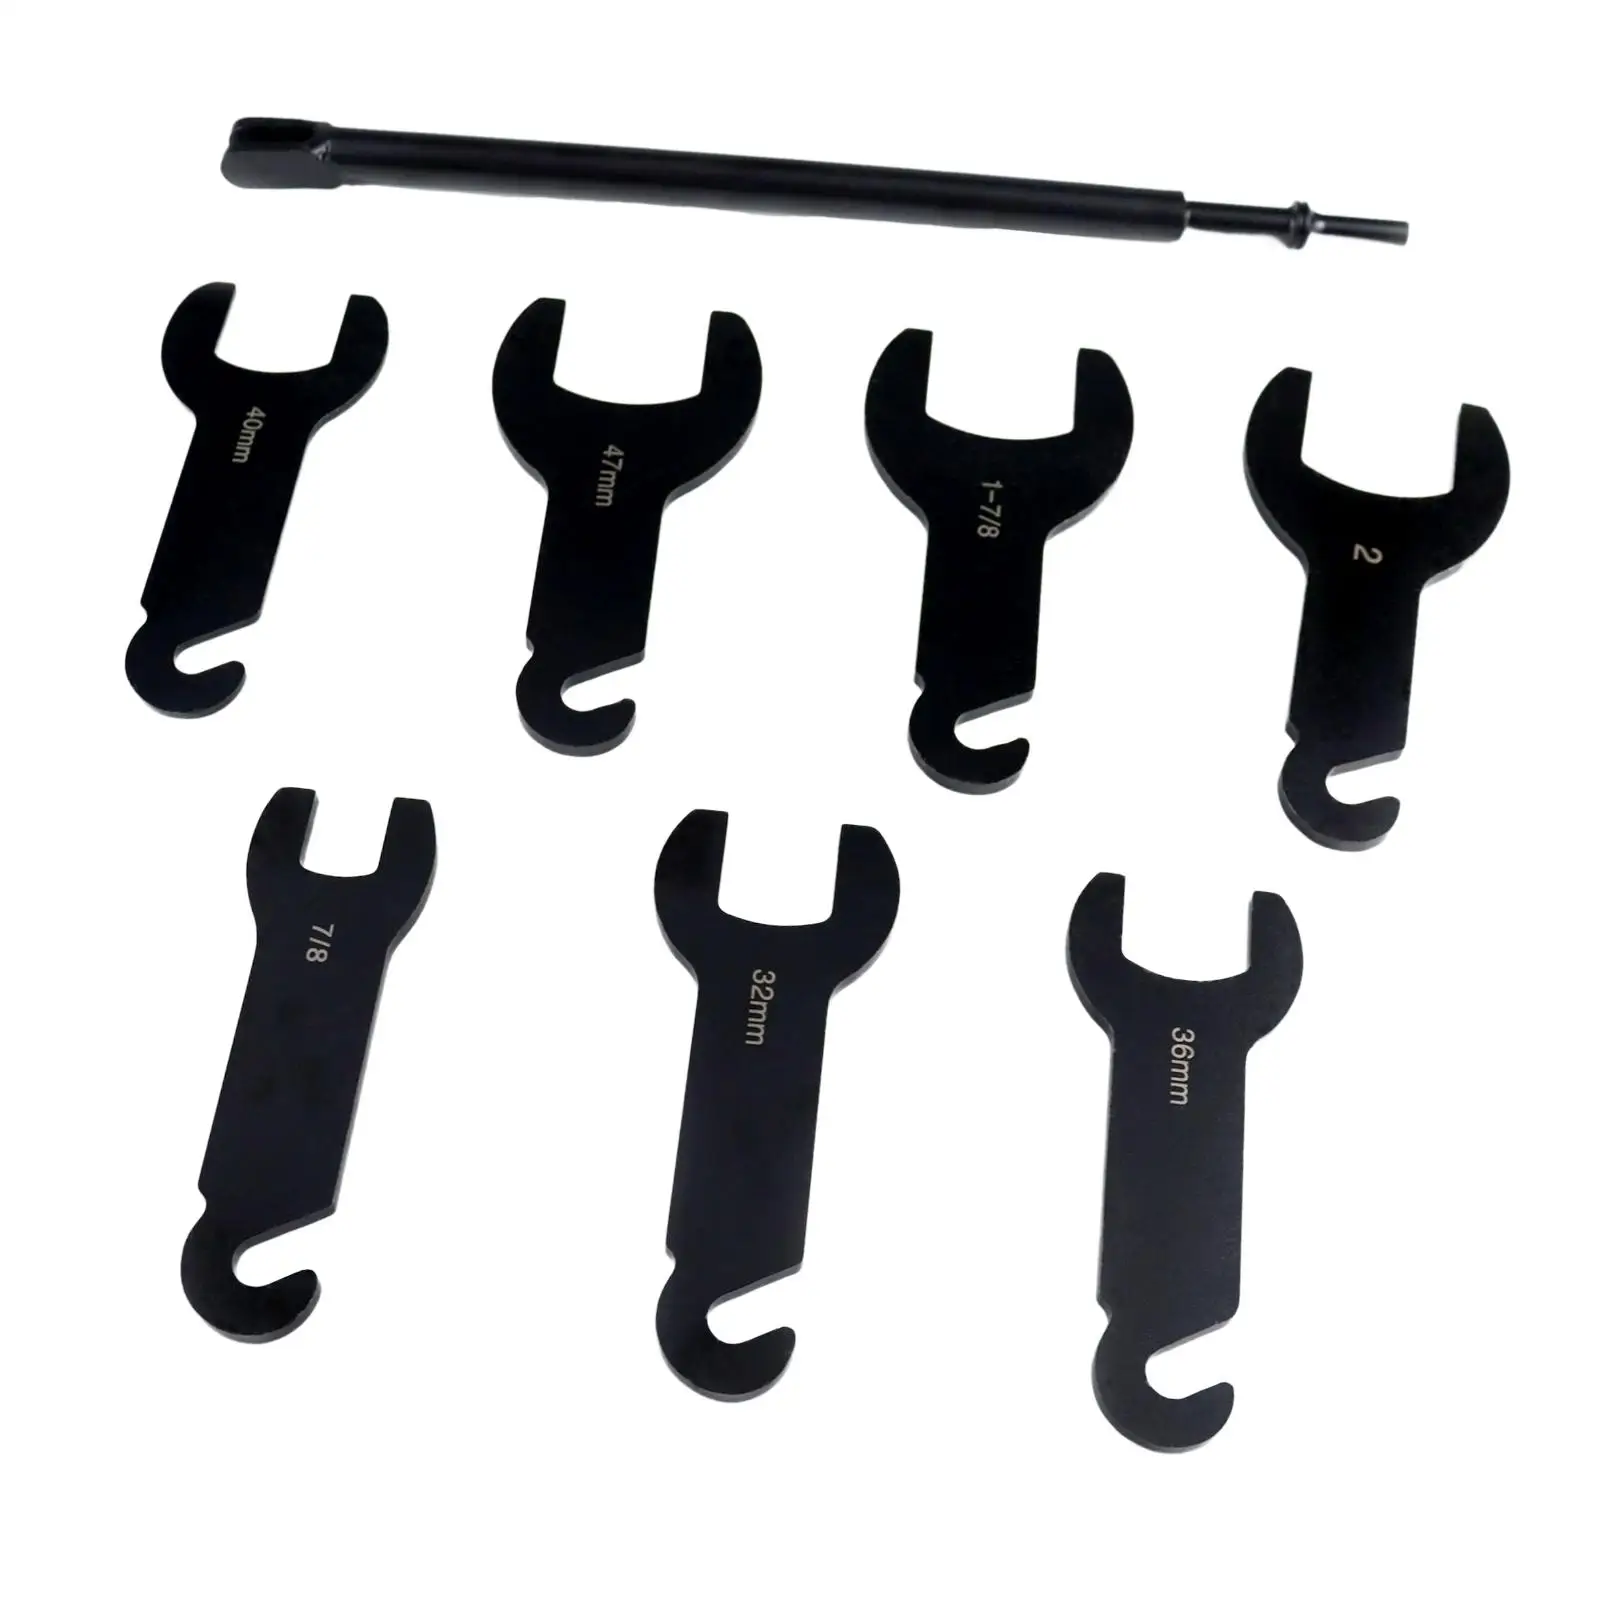 8Pcs Pneumatic Fan Clutch Wrench Set 43300 Car Disassembly Tool Easily Removes and Installs Solid for Jeep Cars Vehicles